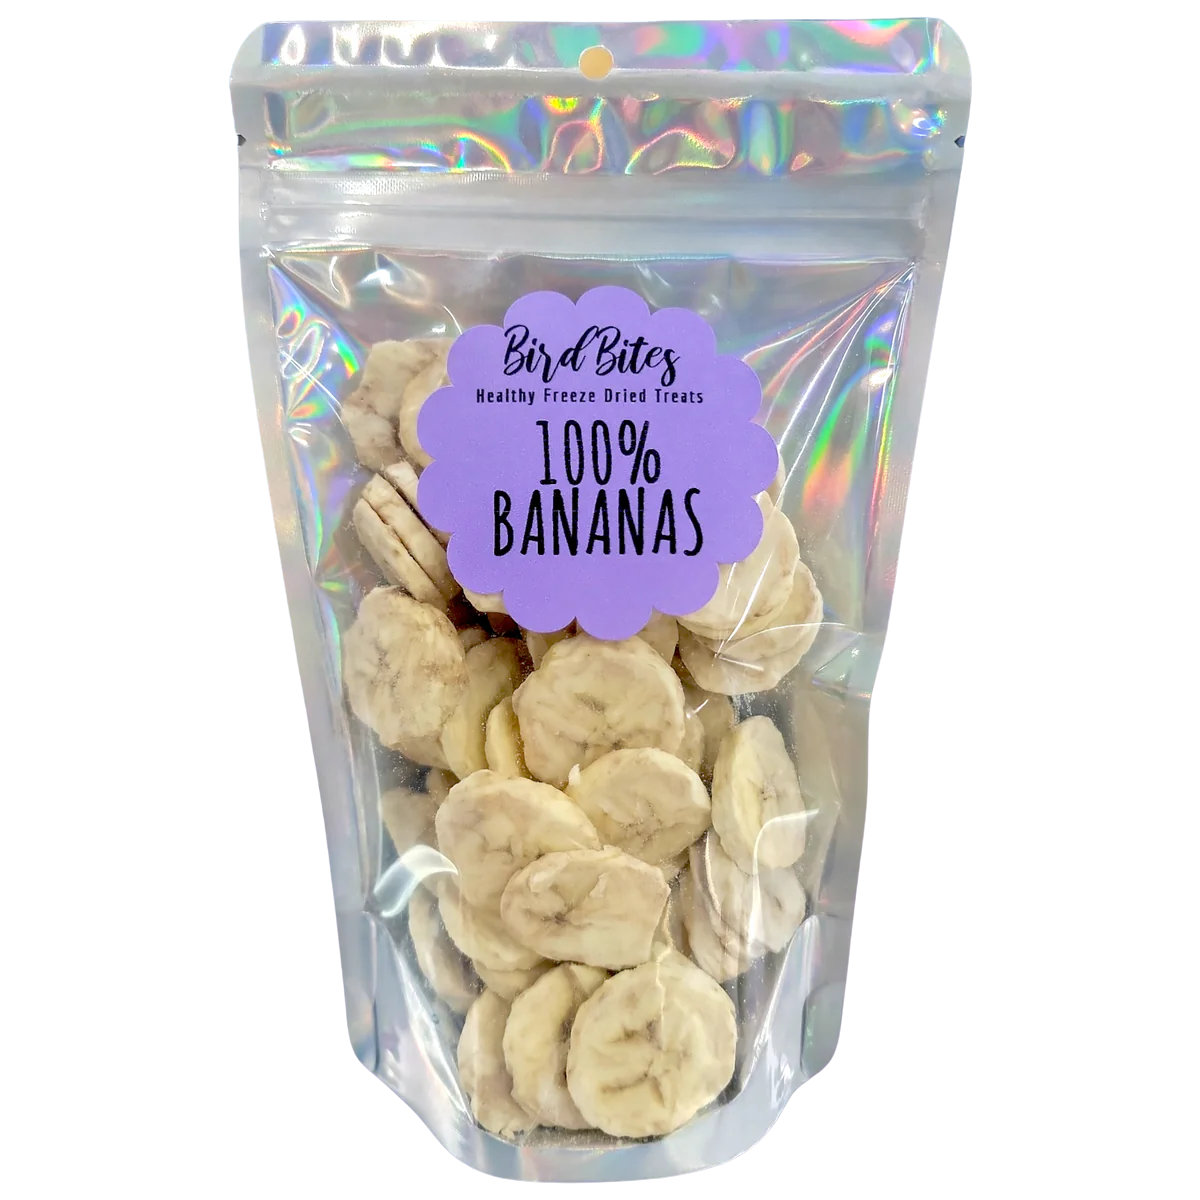 100% Freeze Dried Bananas by Bird Bites Generous 1 Cup Size